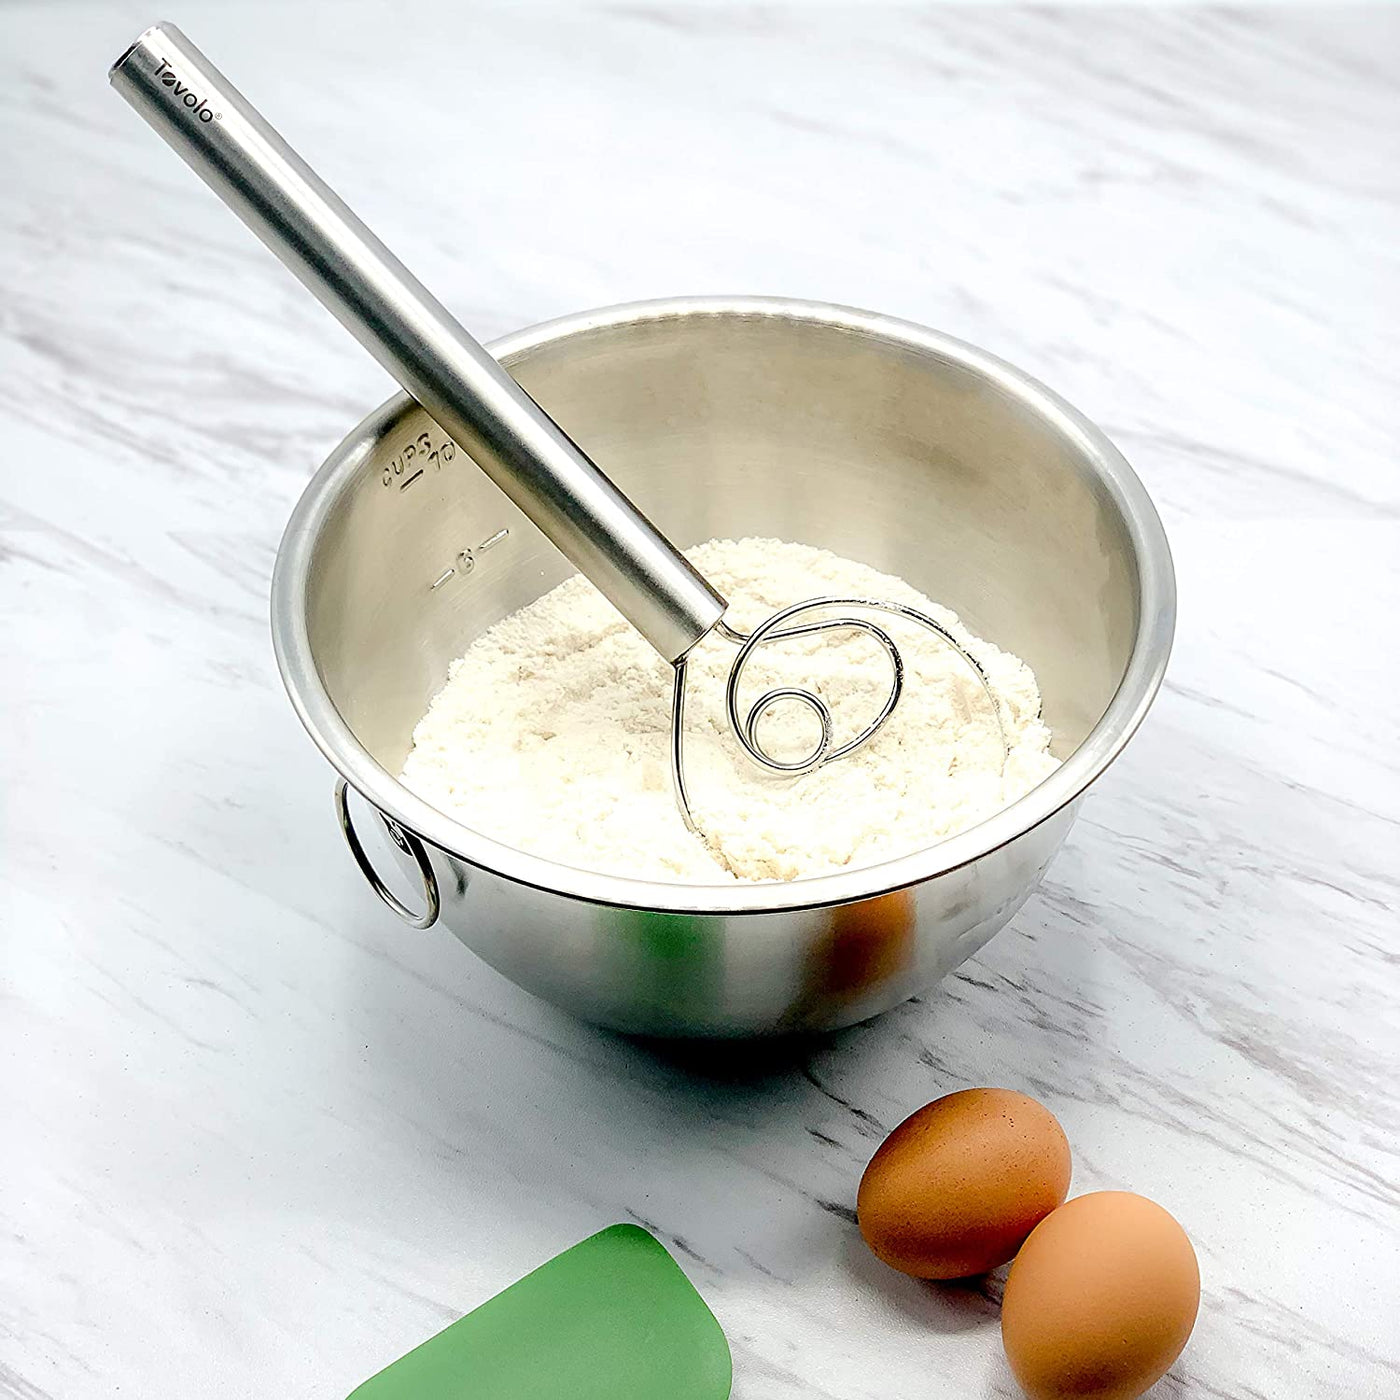 Tovolo, 6 Inch Stainless Steel Mini Whisk